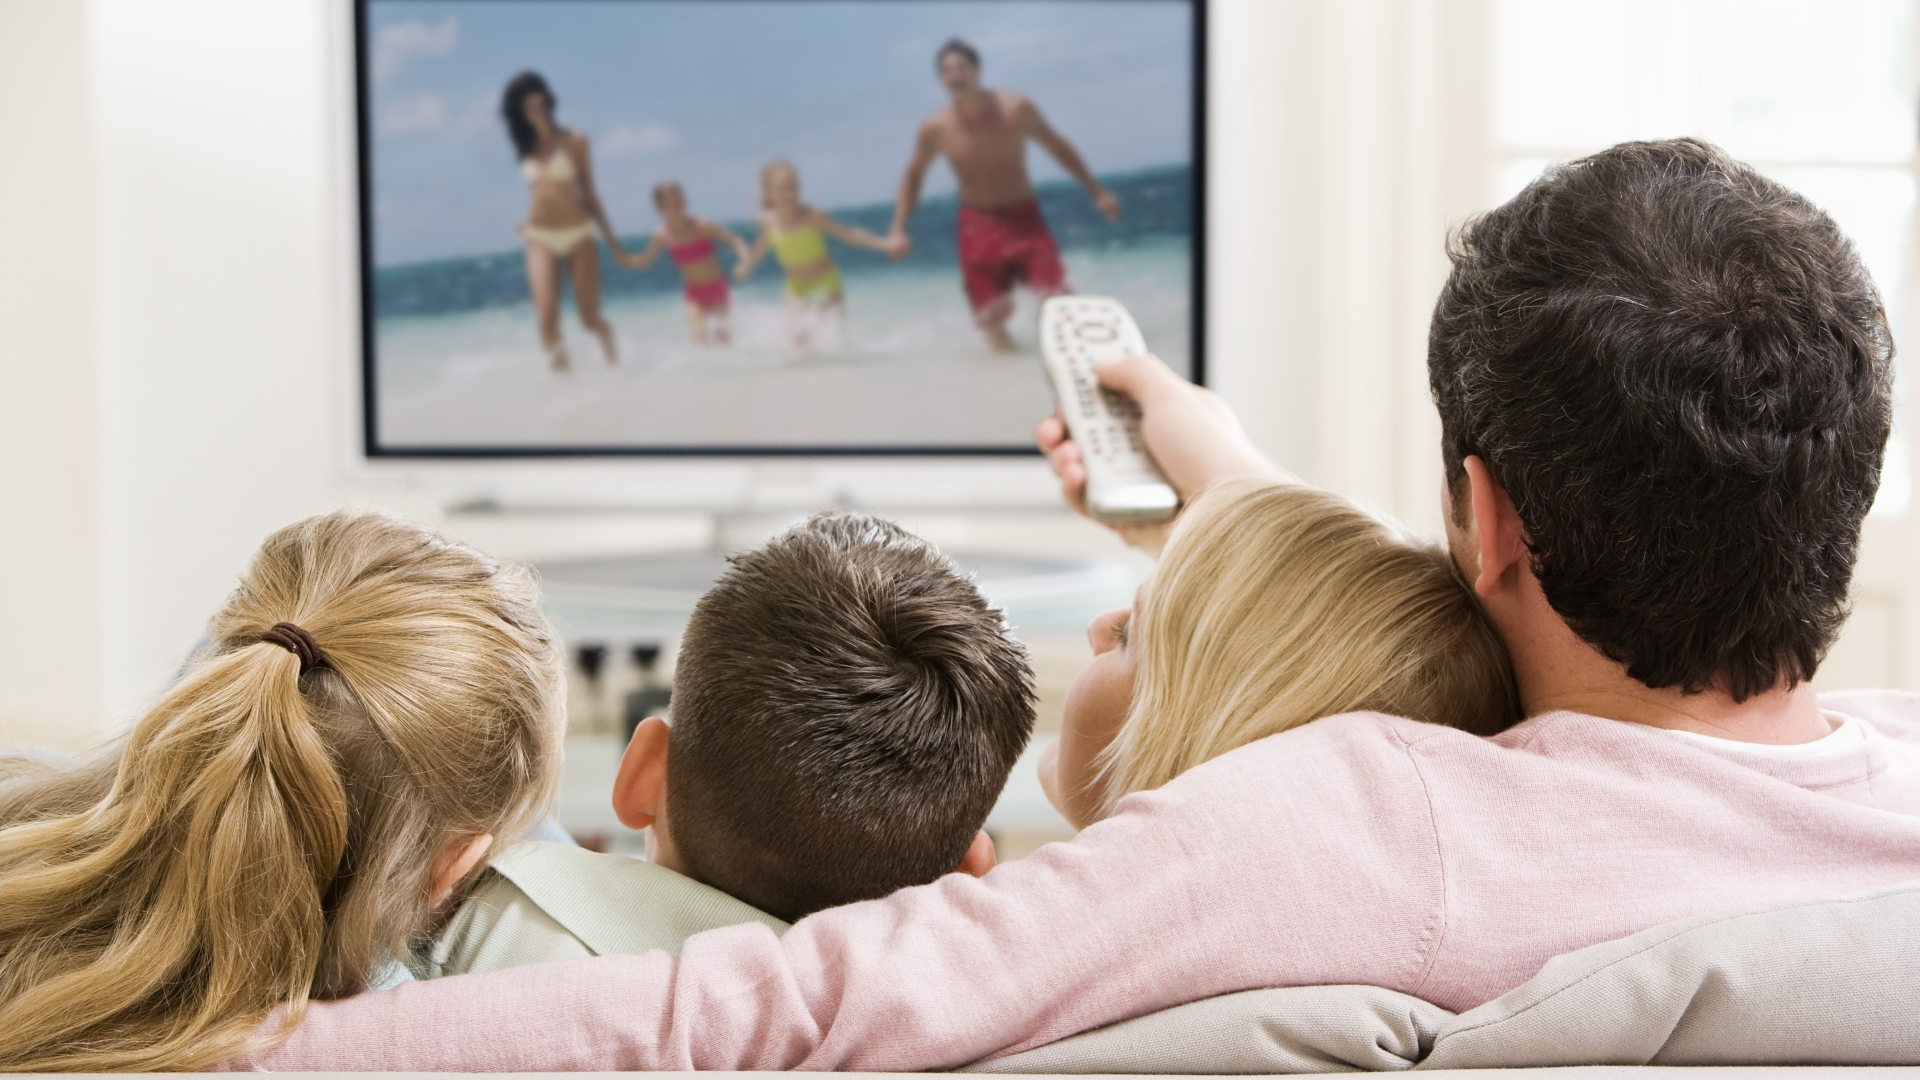 A study shows that TV watching with a child as young as a toddler can actually help their development rather than hinder it.